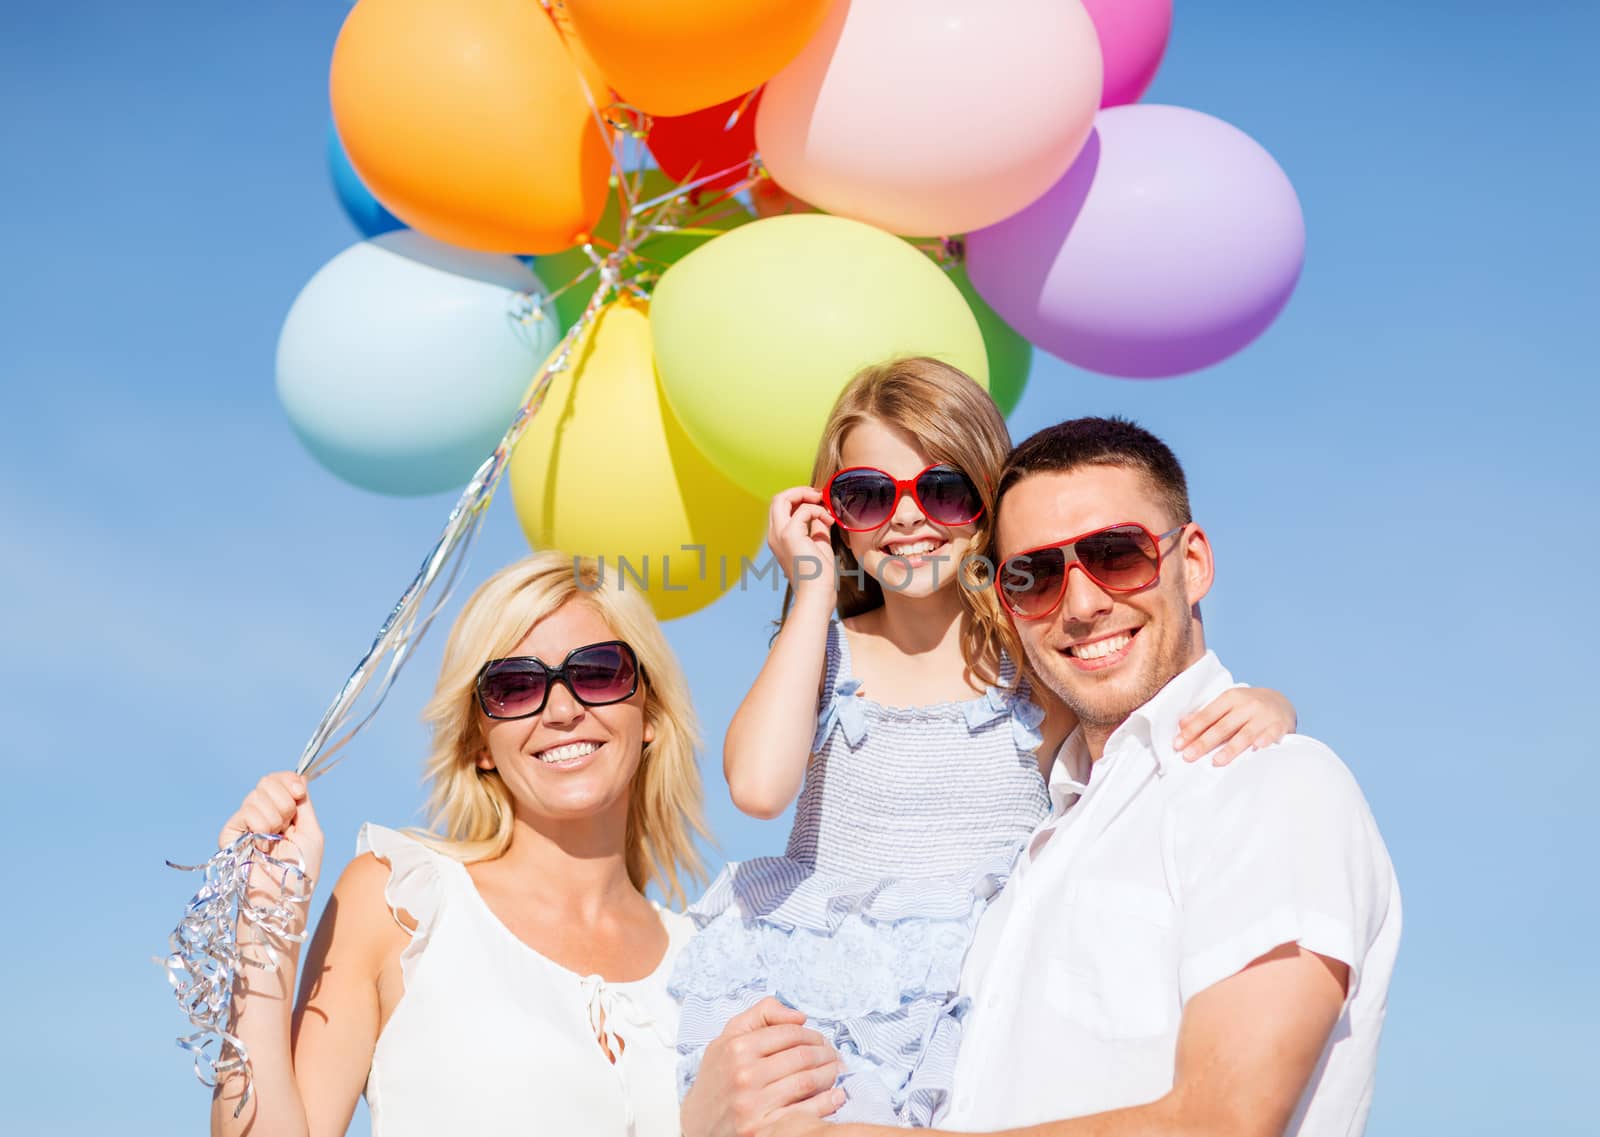 summer holidays, celebration, children and people concept - family with colorful balloons